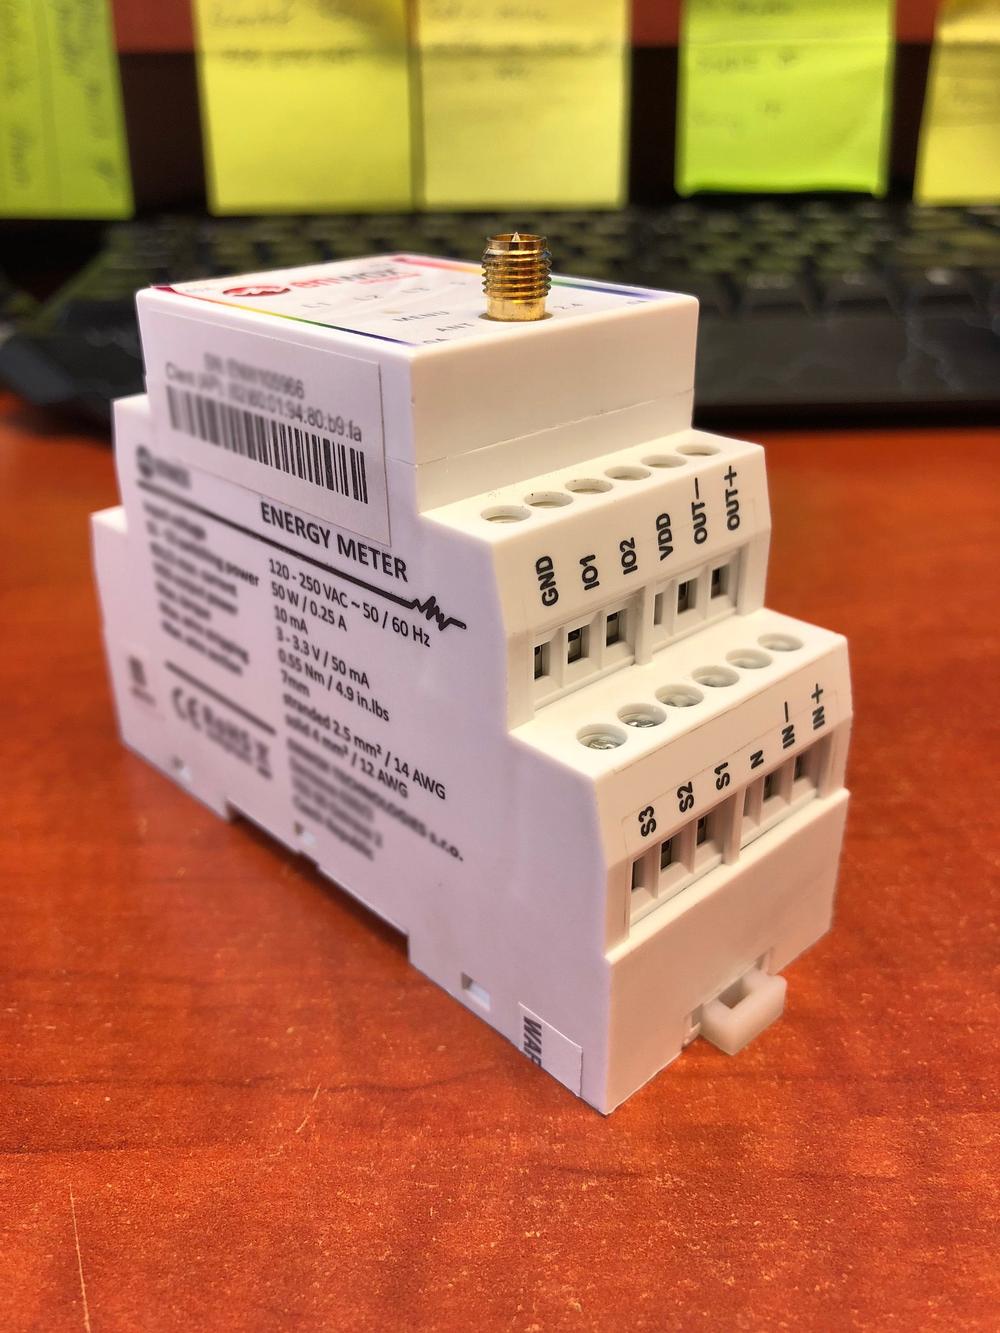 How to look good on a DIN rail